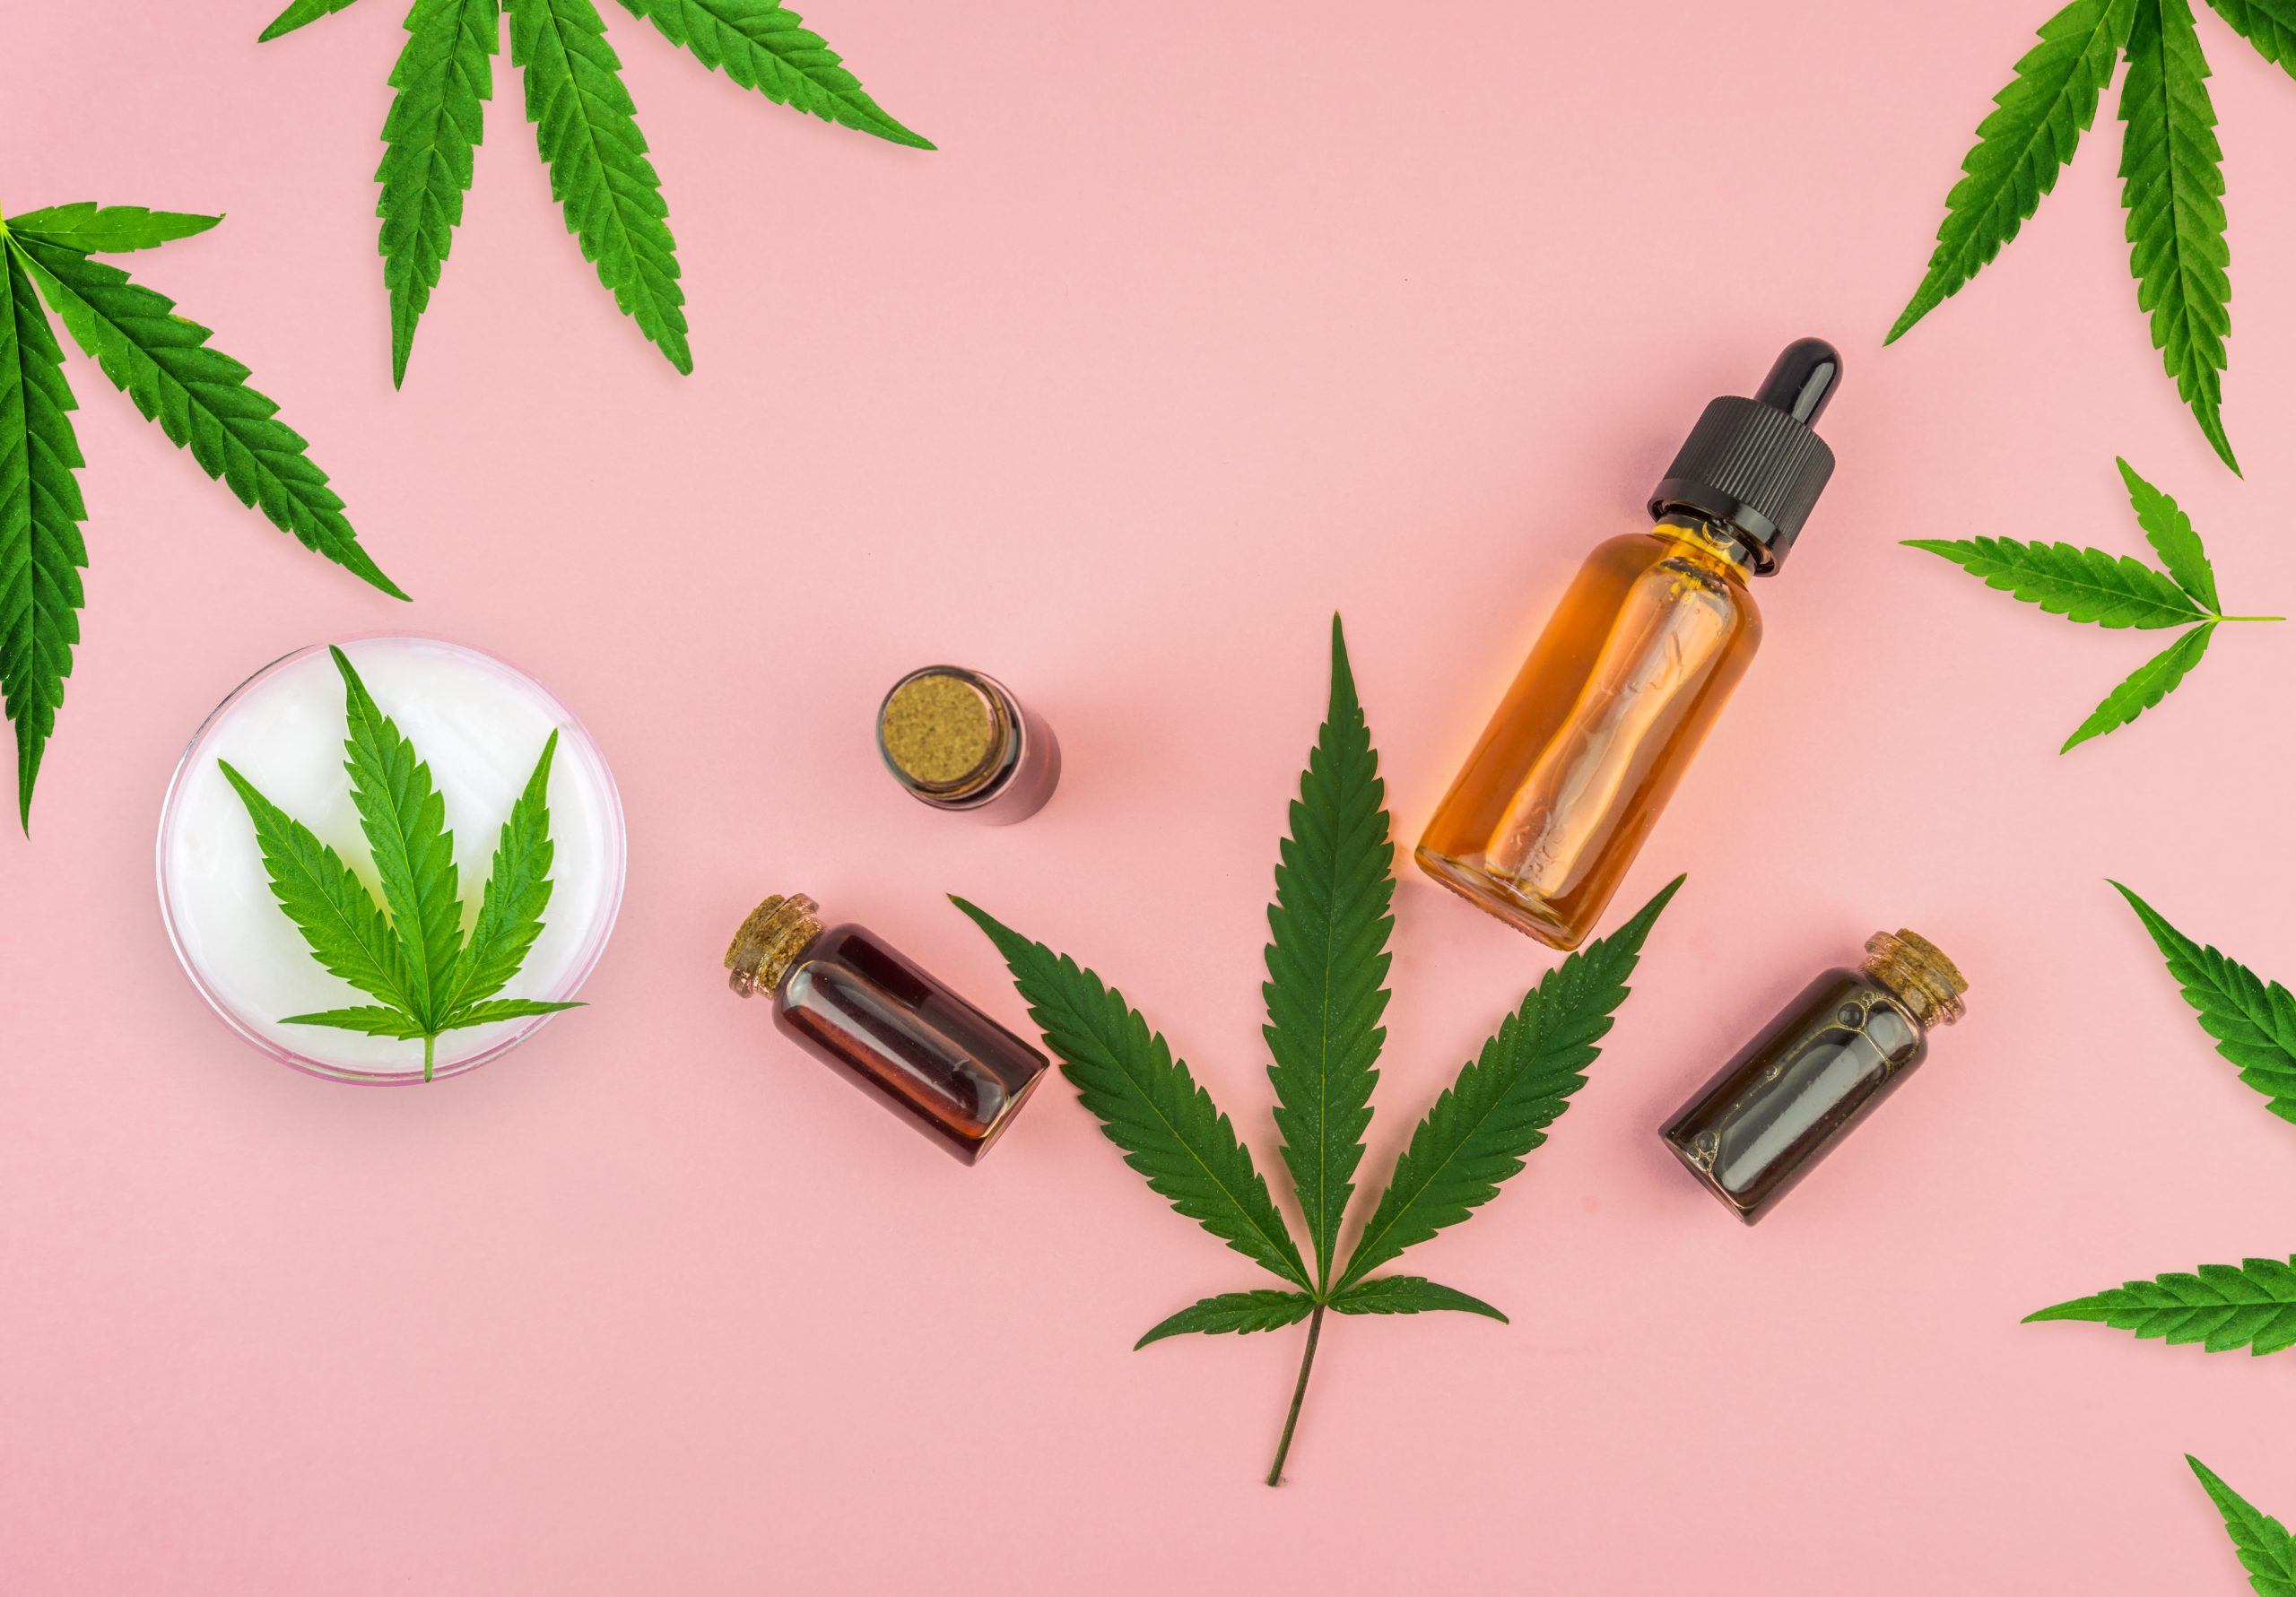 THE BEST USES FOR CBD LOTIONS REVEALED